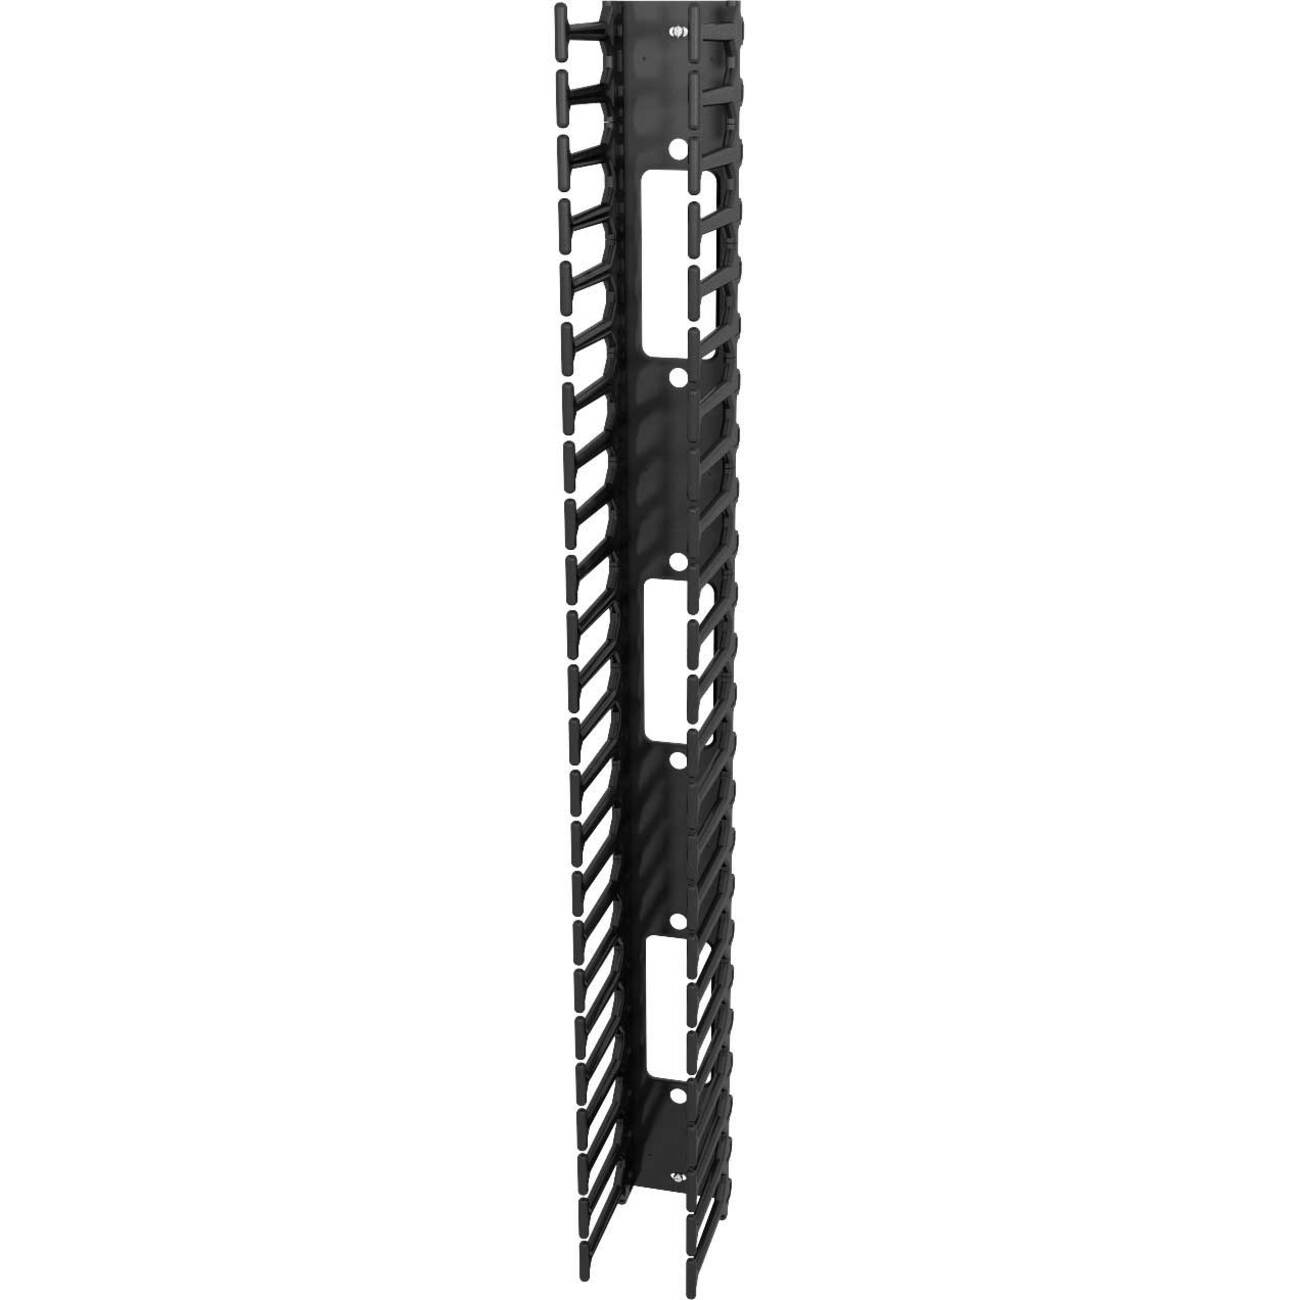 Vertiv Vertical Cable Manager for 800mm Wide 48U